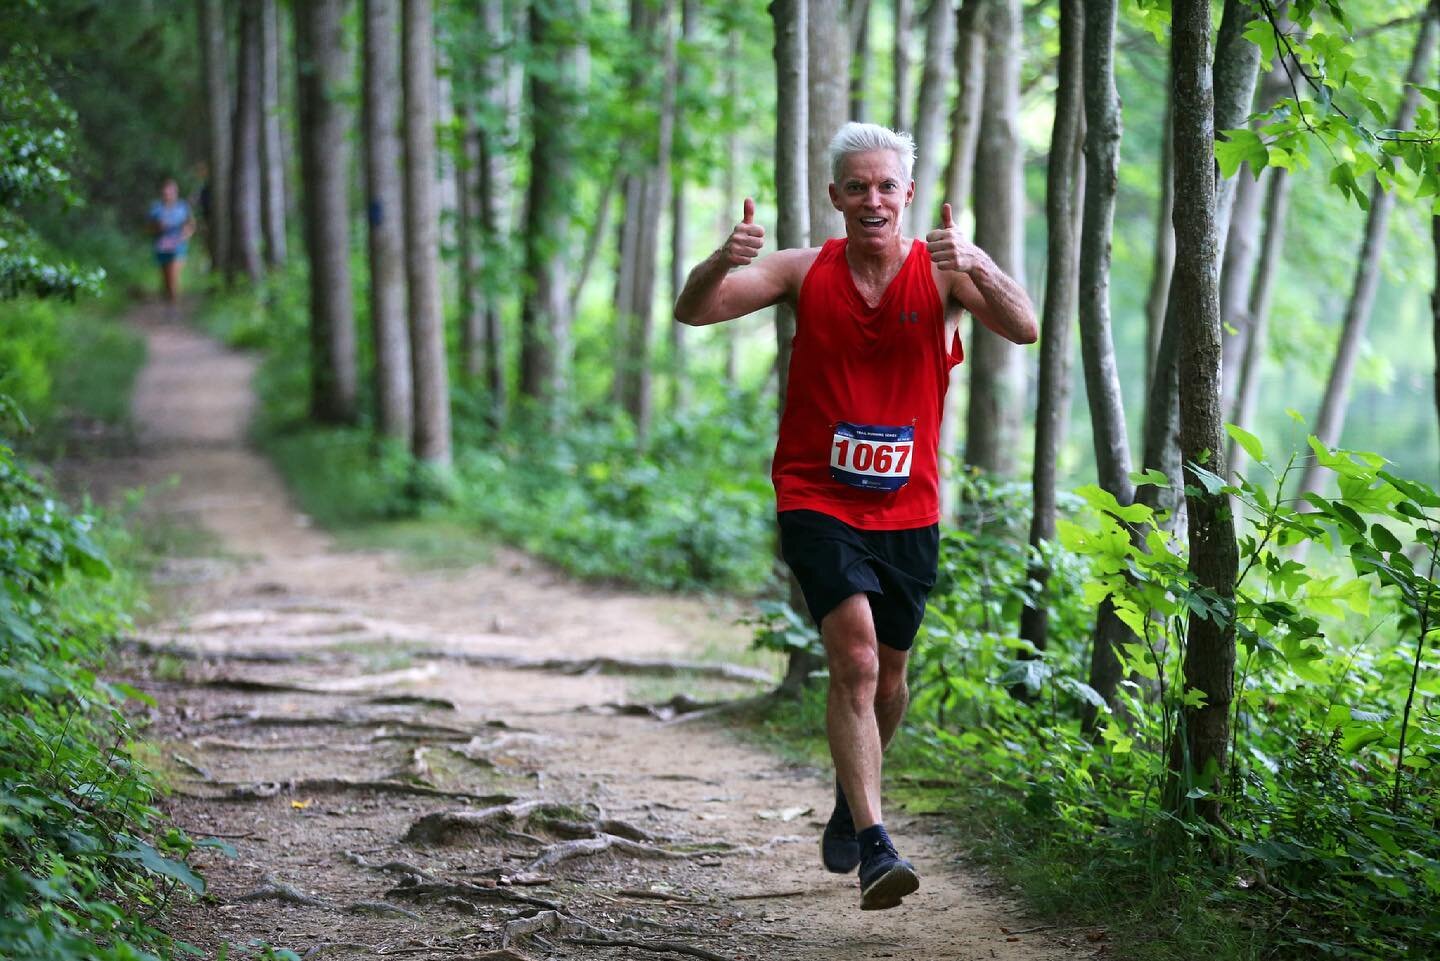 All photos from the @ex2adventures Blue Crab Bolt 5K &amp; 10K Trail Running Series are online and FREE to download! Seneca Creek State Park, Gaithersburg, MD. Saturday, 26 June 2021. (📸 Brian W. Knight/Swim Bike Run Photo) #RaceWithEX2 #RunMoreTrai